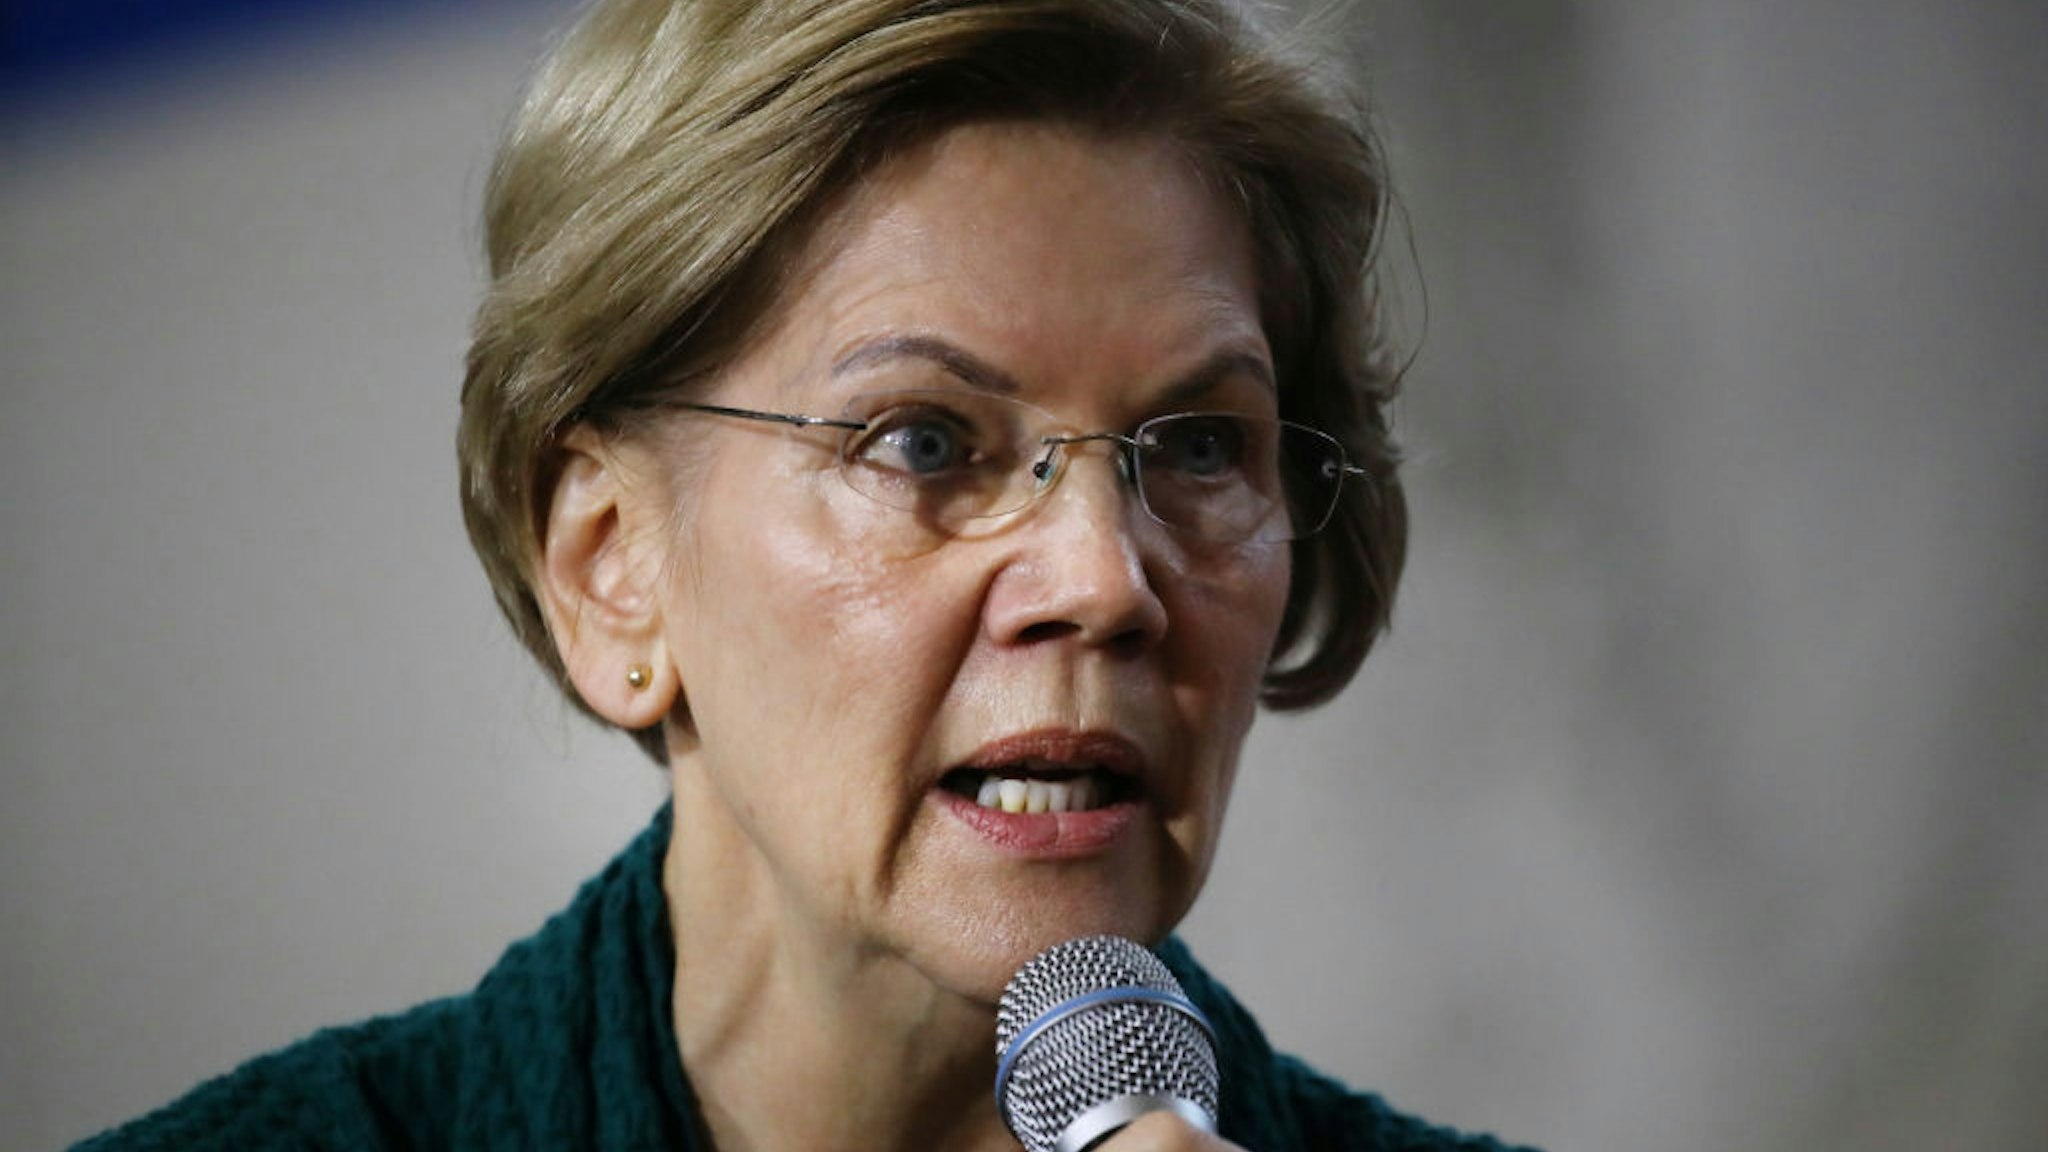 Democratic presidential candidate Sen. Elizabeth Warren (D-MA) speaks during a town hall event at Weeks Middle School on January 19, 2020 in Des Moines, Iowa. Warren has joined other candidates in campaigning across the state in the weeks before the 2020 Iowa Democratic caucuses being held on February 3. (Photo by Spencer Platt/Getty Images)